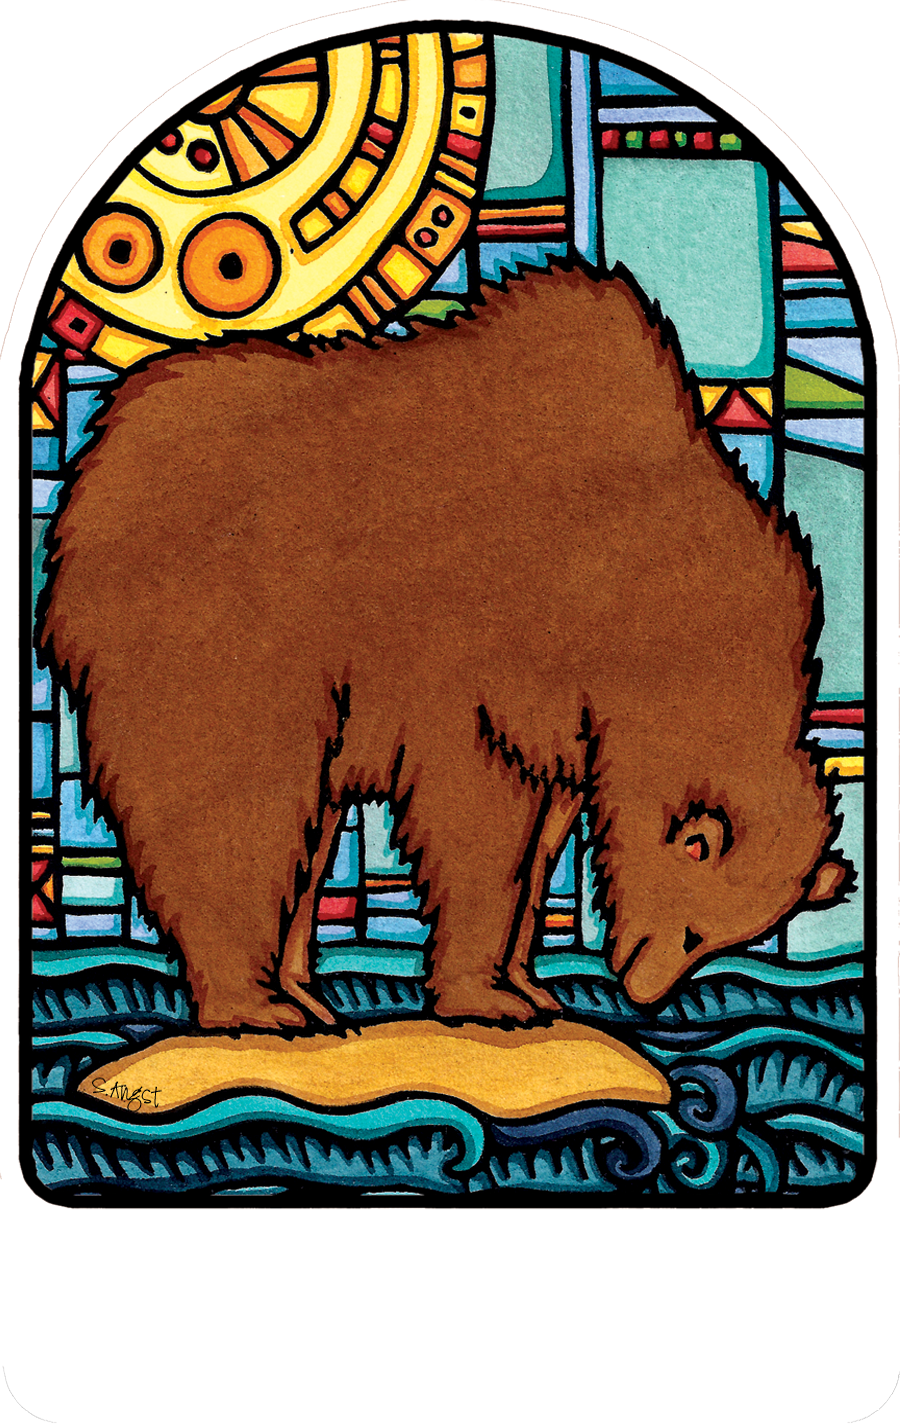 Name Dropped Sticker - QTY 250: Grizzly Bear